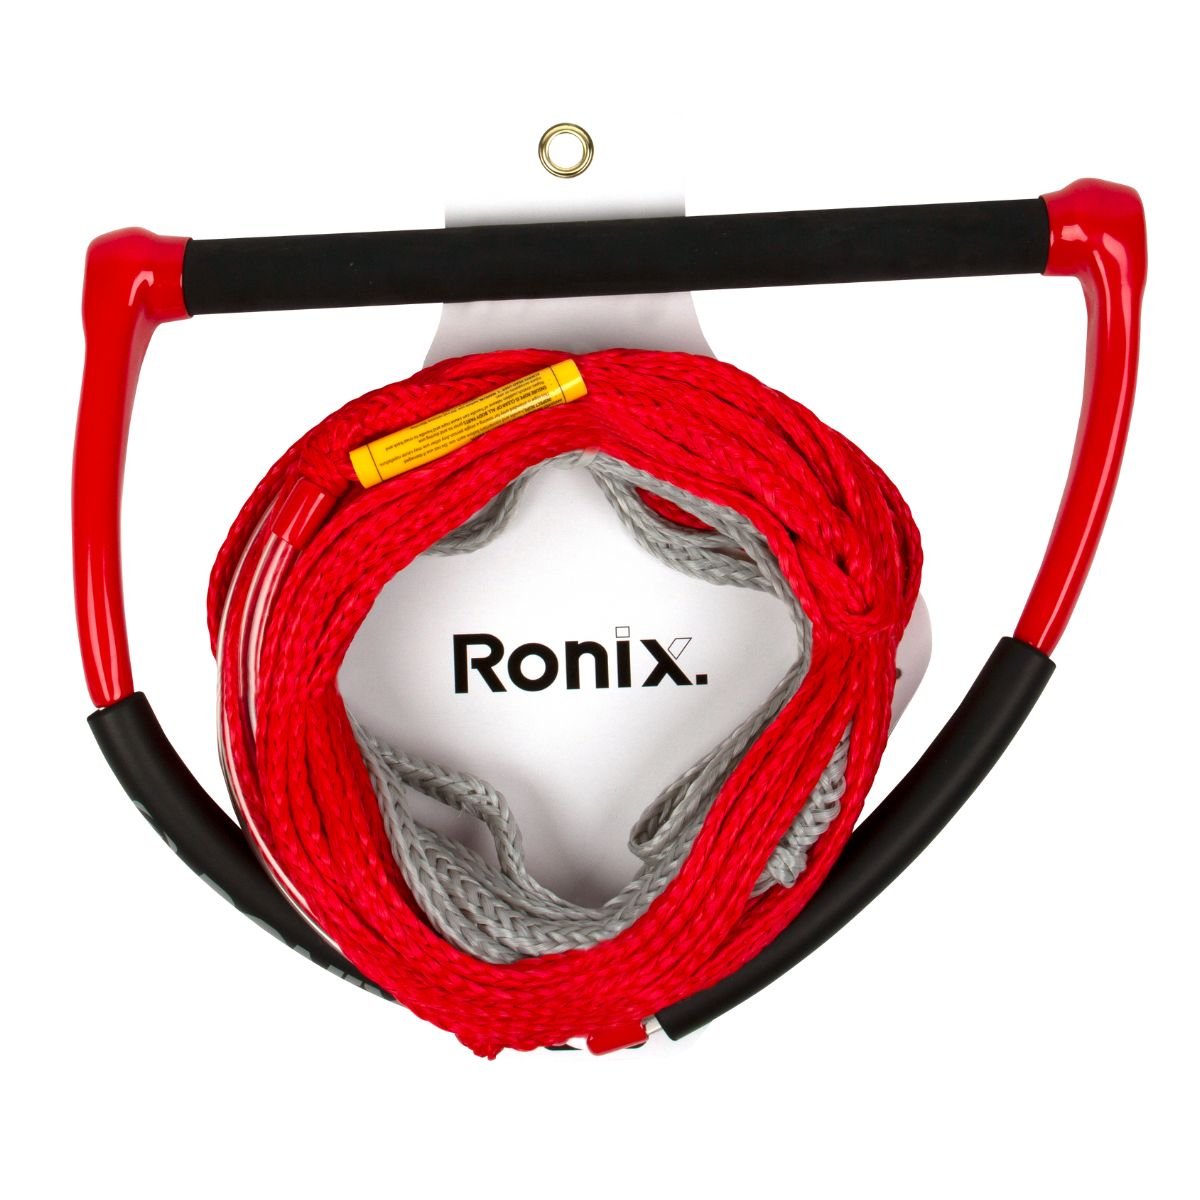 Ronix Combo 1.0 TPR Grip w/65ft. 4 Sect. PE Rope - BoardCo